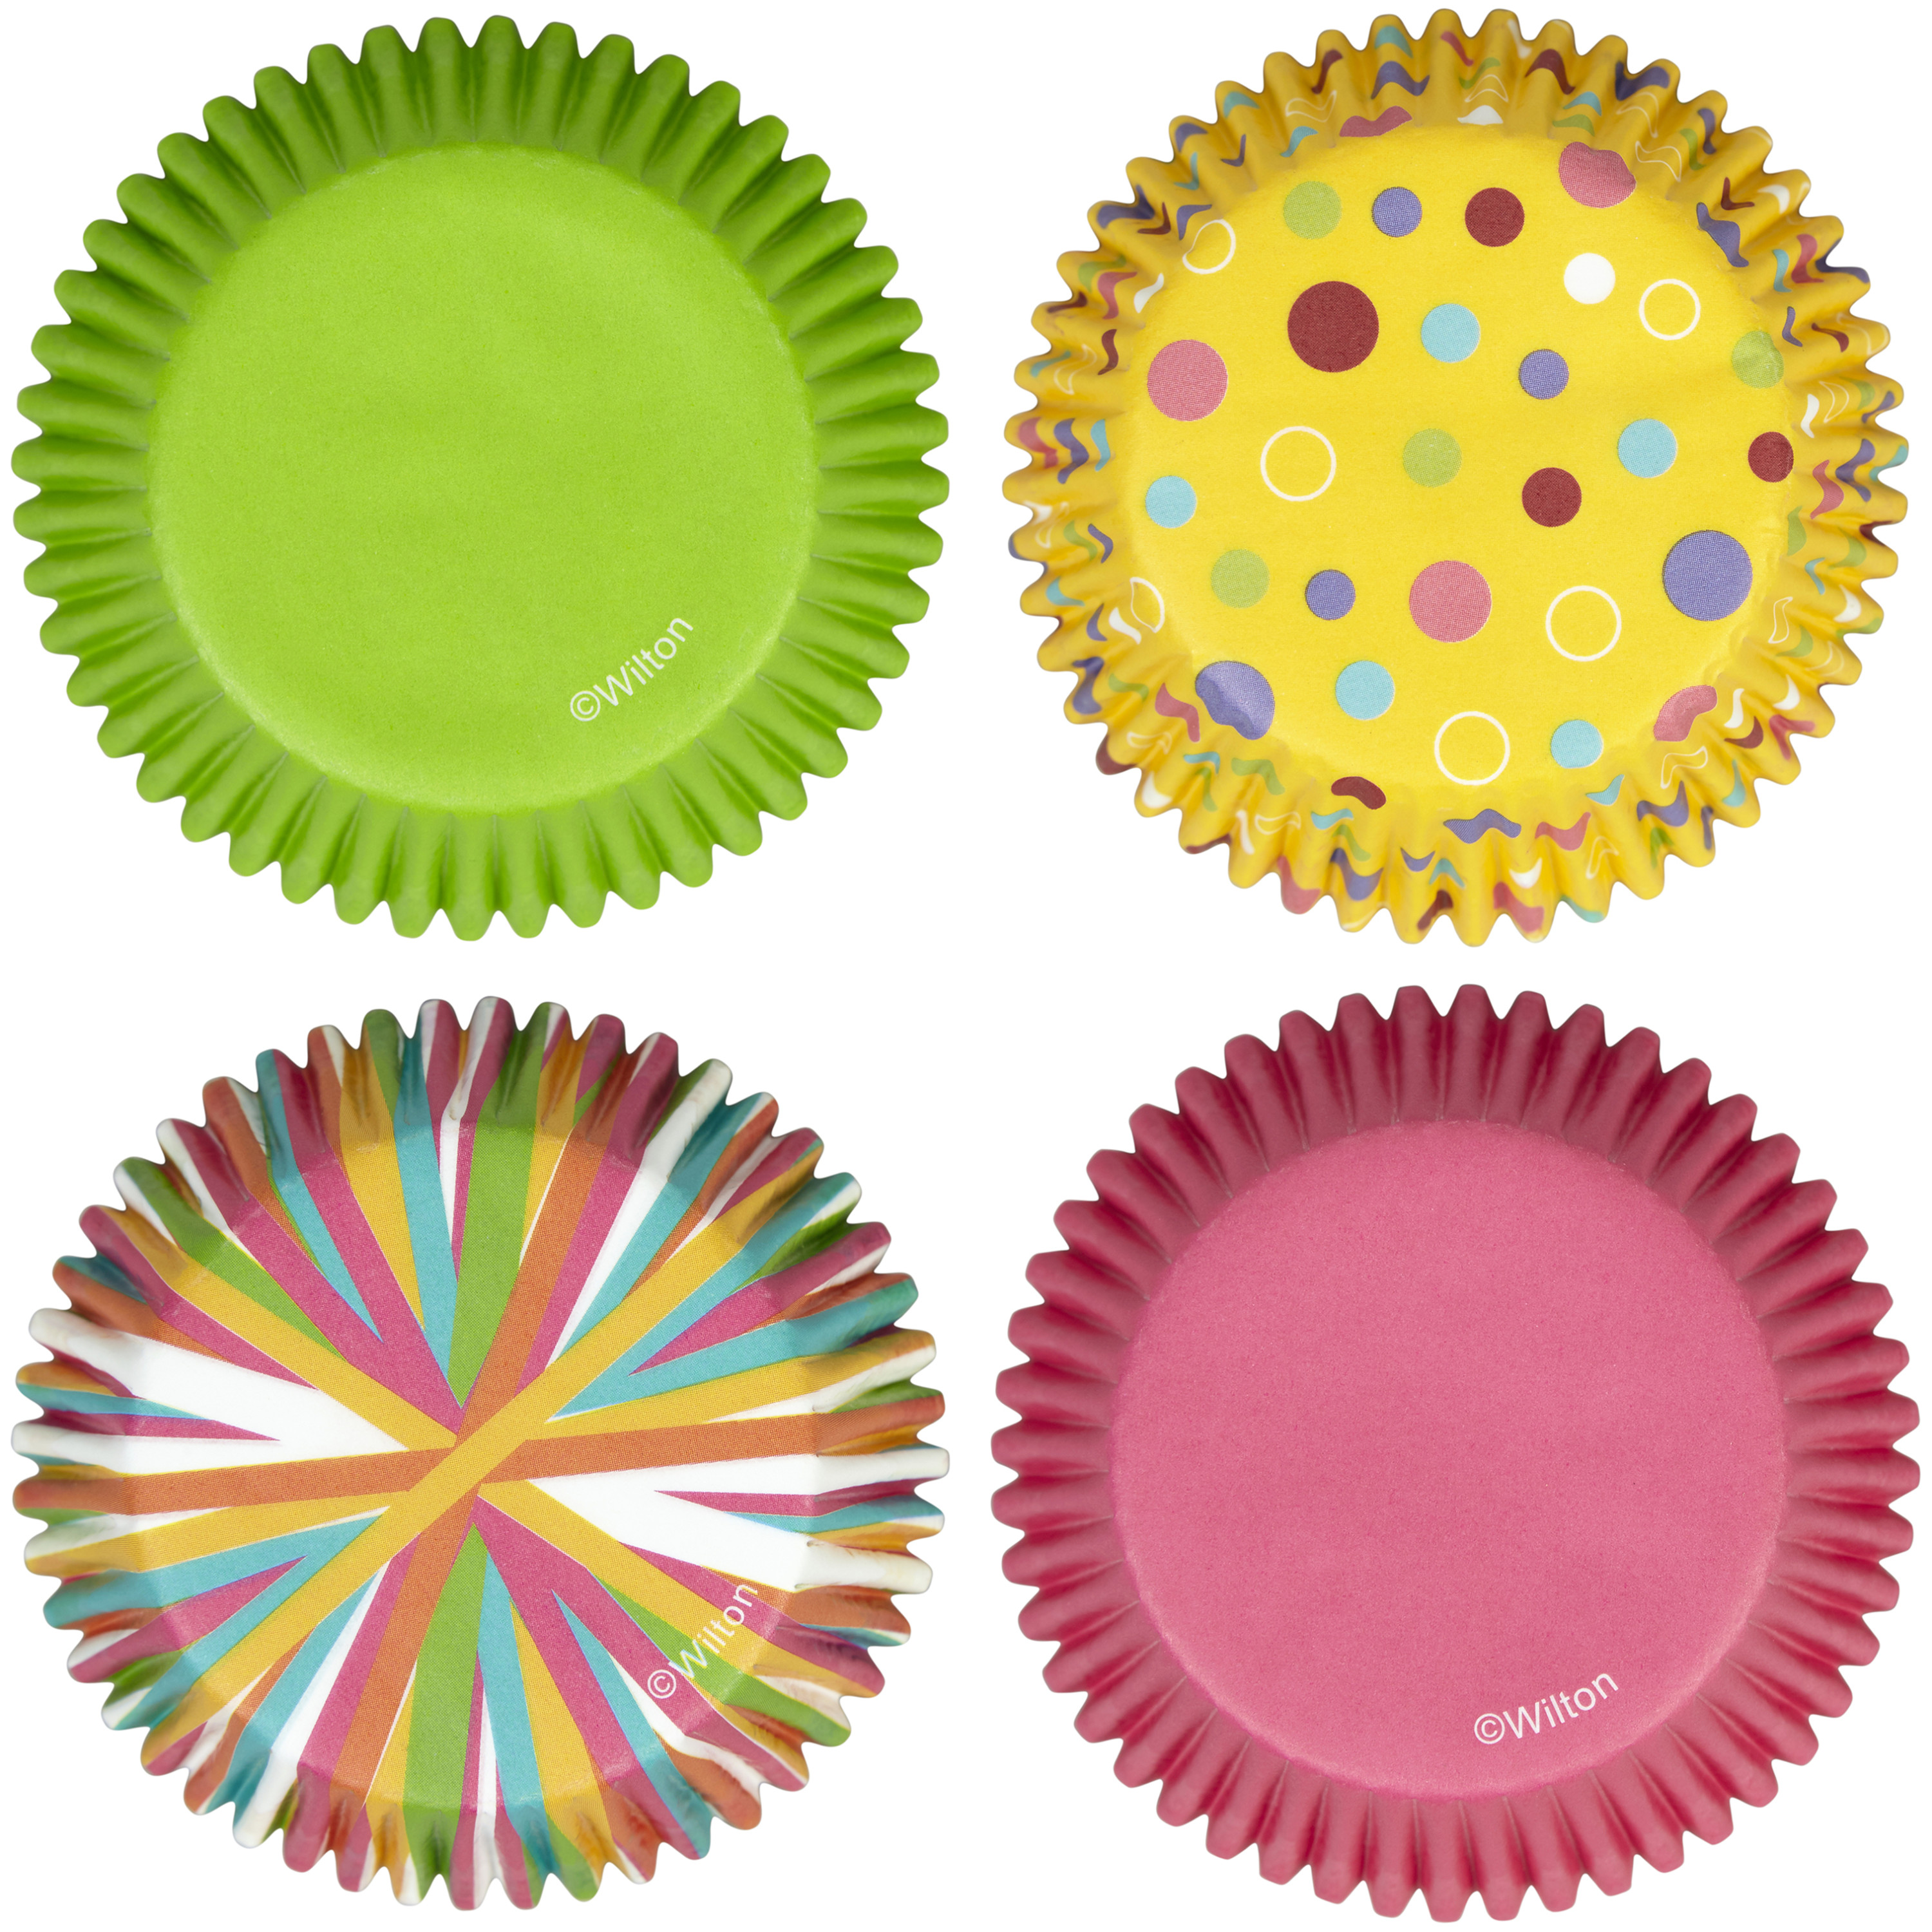 Wilton Stripes and Polka Dots Standard Cupcake Liners, 150-Count - image 2 of 4